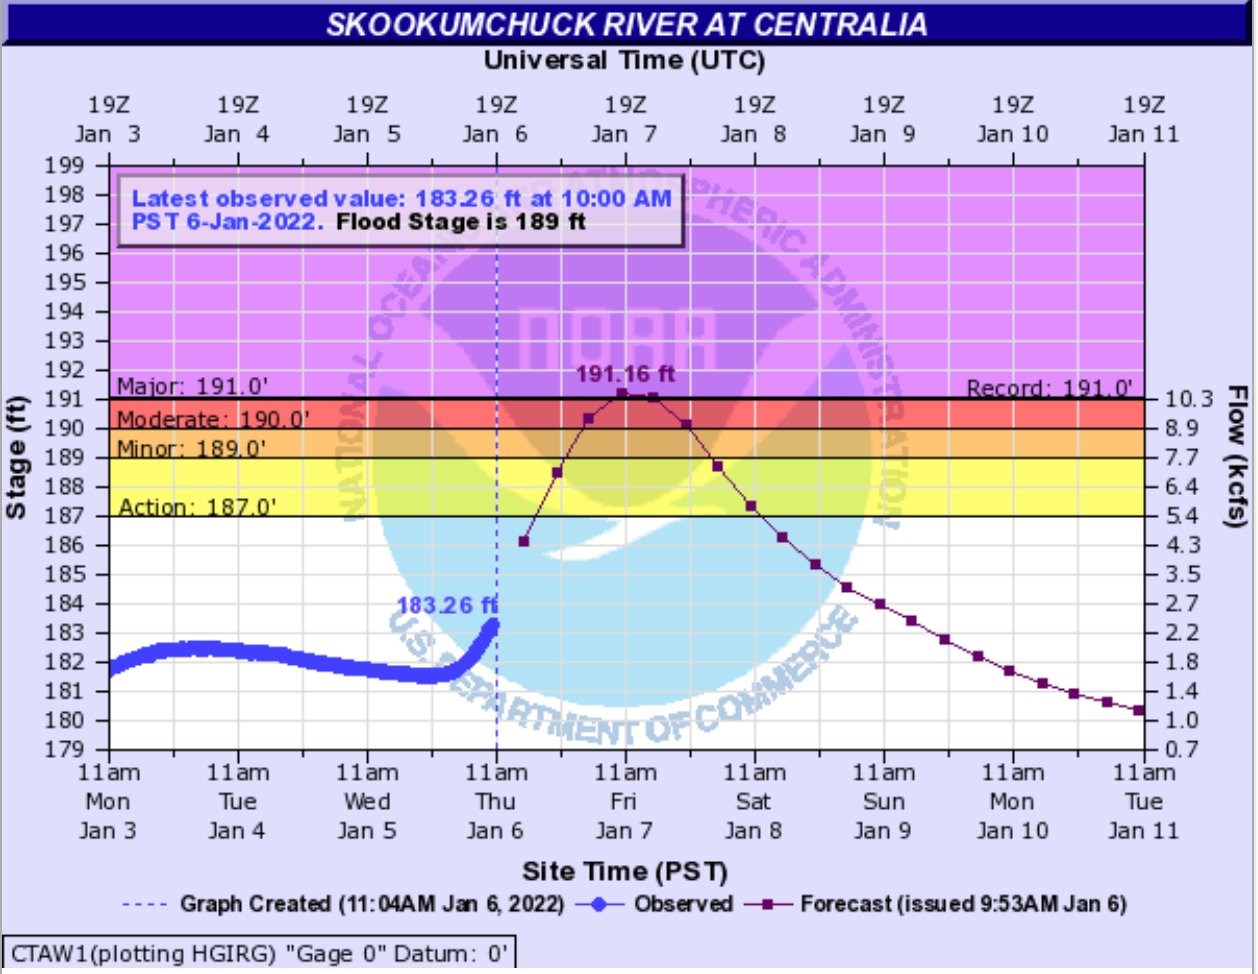 Above is the update on the Skookumchuck River at Centralia.